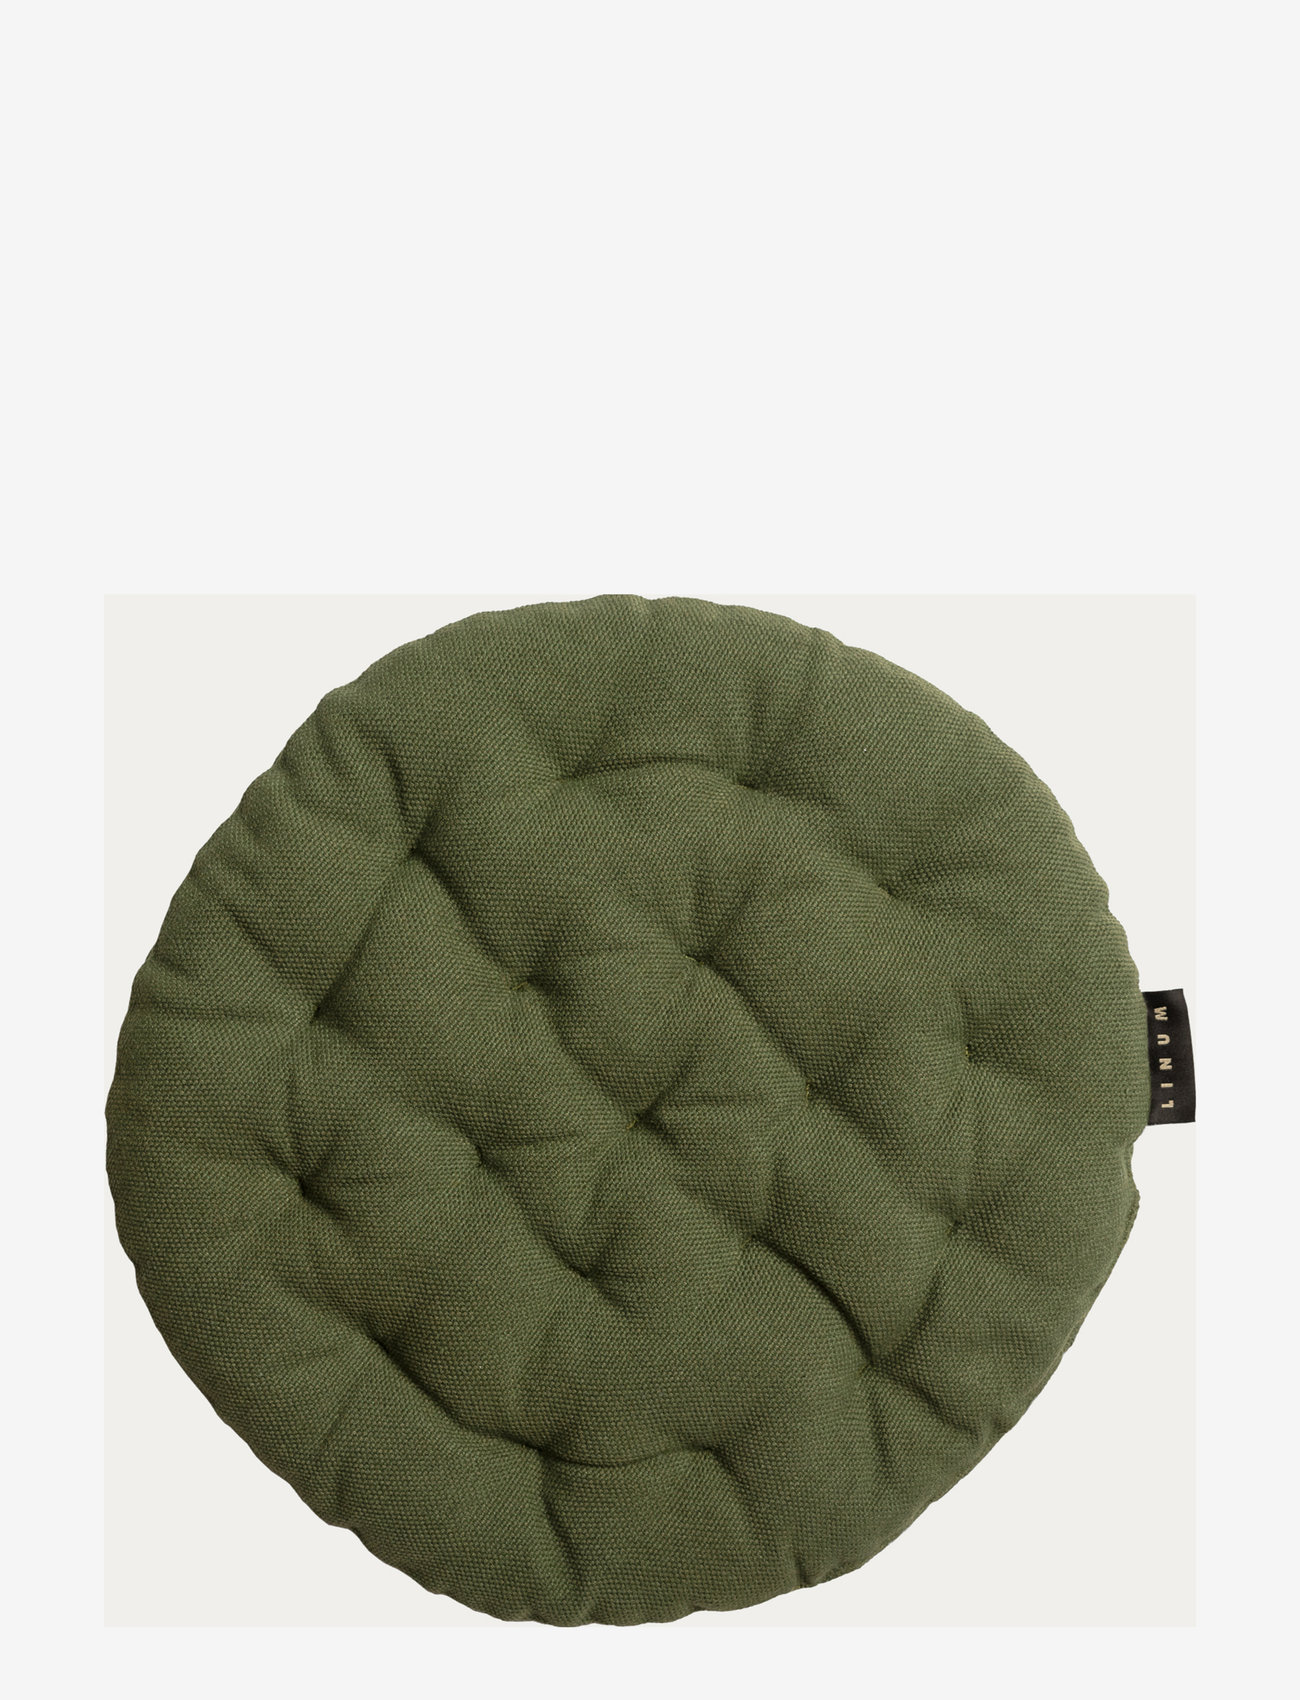 LINUM - PEPPER SEAT CUSHION - lowest prices - dark olive green - 0